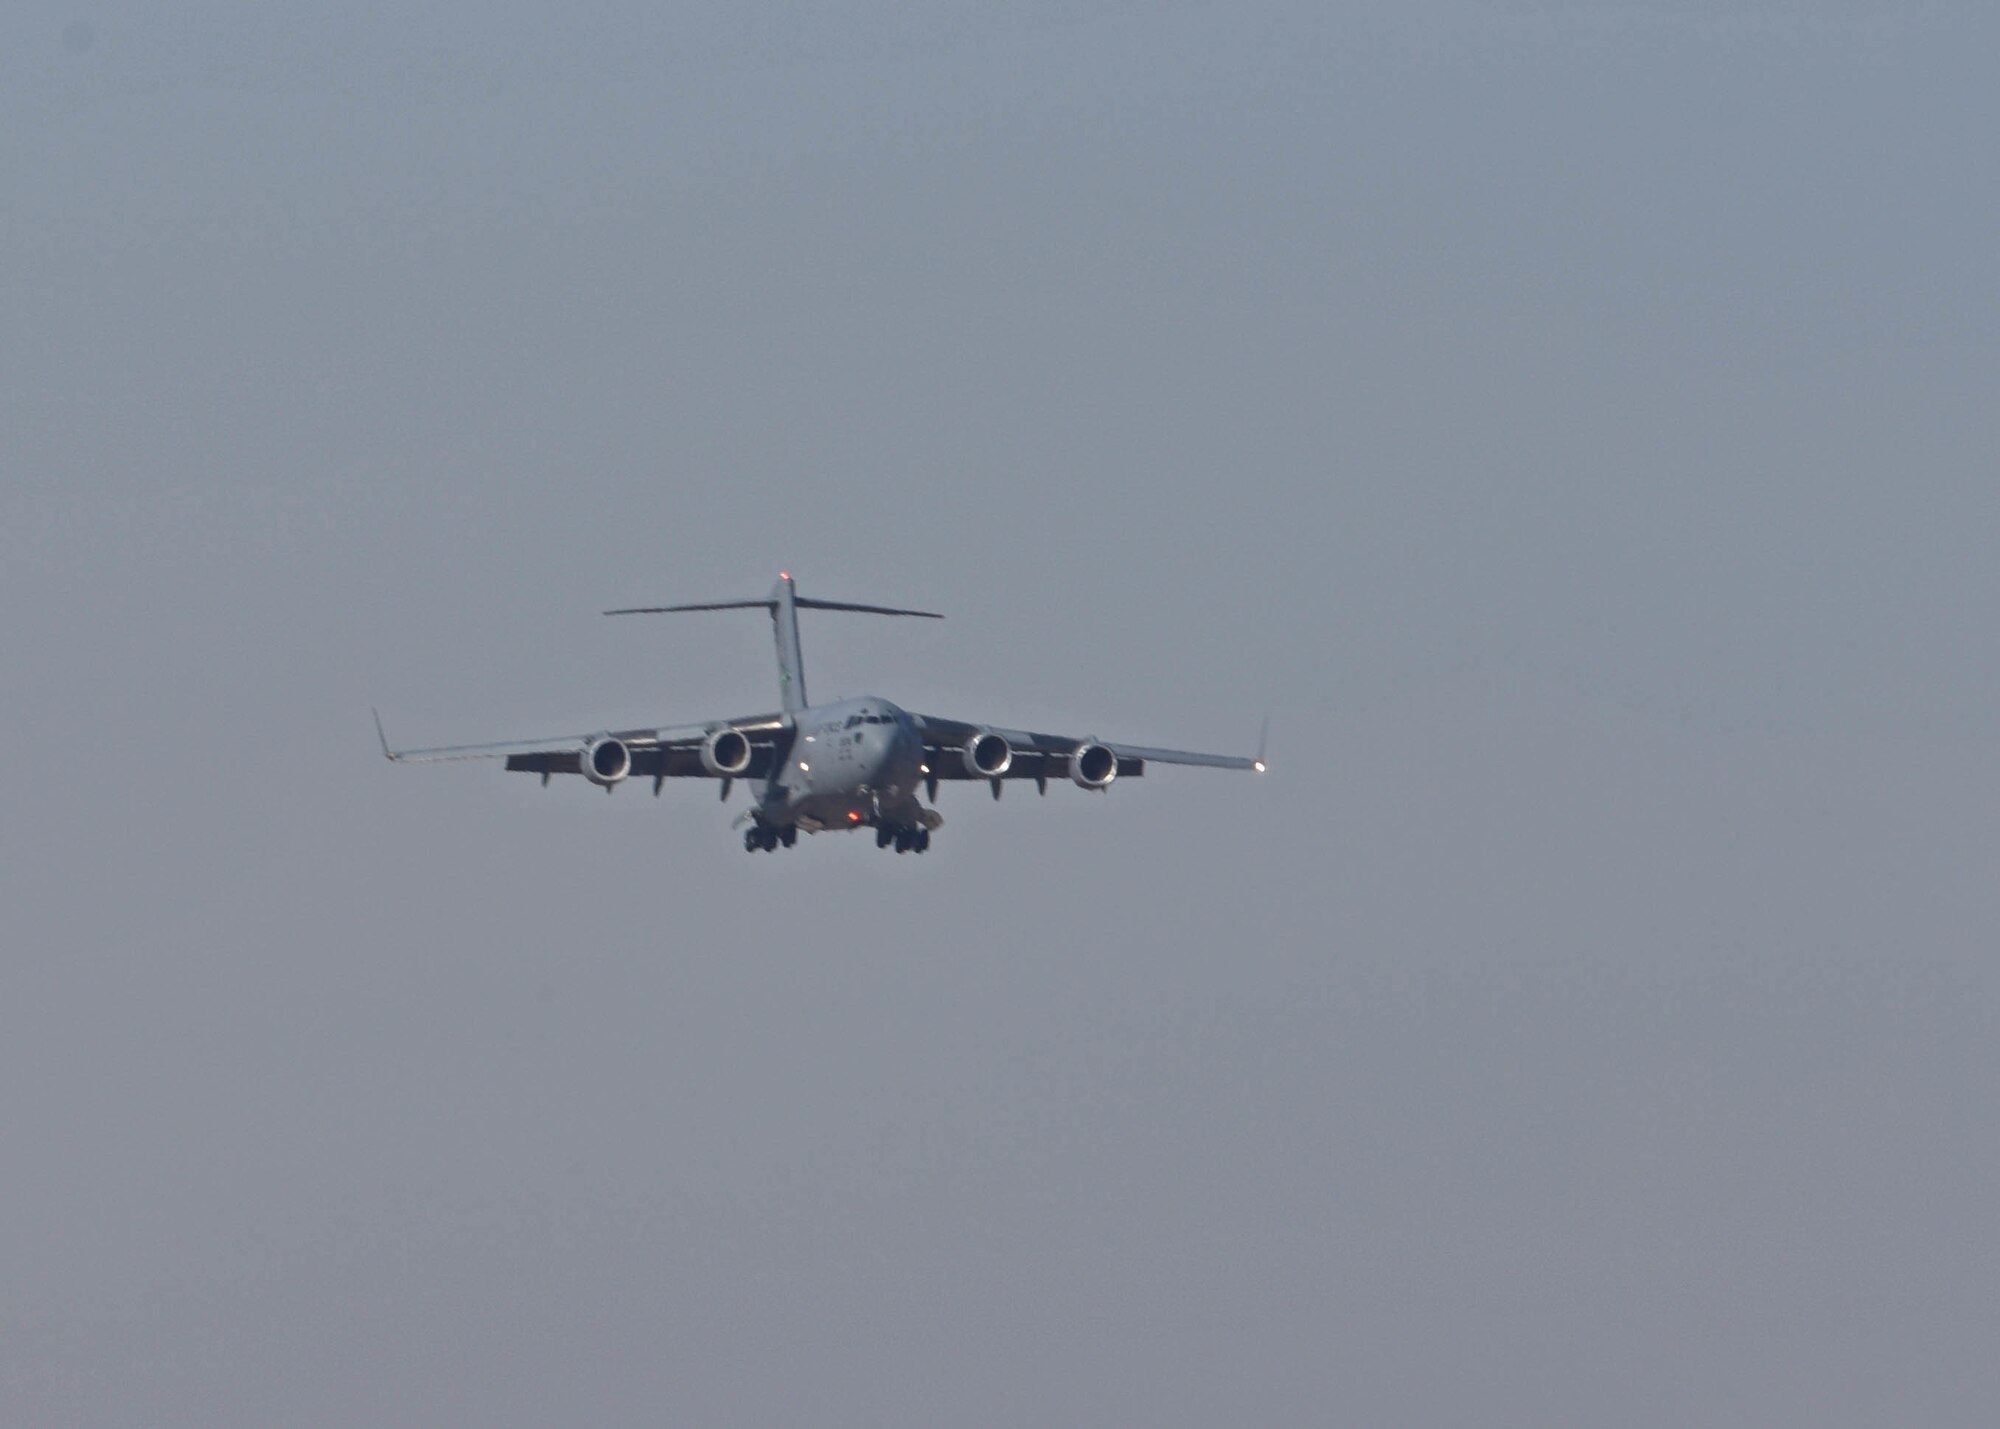 A C-17 Globemaster III aircraft from the 62d Airlift Wing, Joint Base Lewis-McChord, Washington, prepares to land at Gowen Field, Boise, Idaho, Oct. 20, 2022. The 62d AW held its semi-annual readiness exercise, Exercise Rainier War 22B from Oct. 6-22. (U.S. Air Force photo by Staff Sgt. Zoe Thacker)